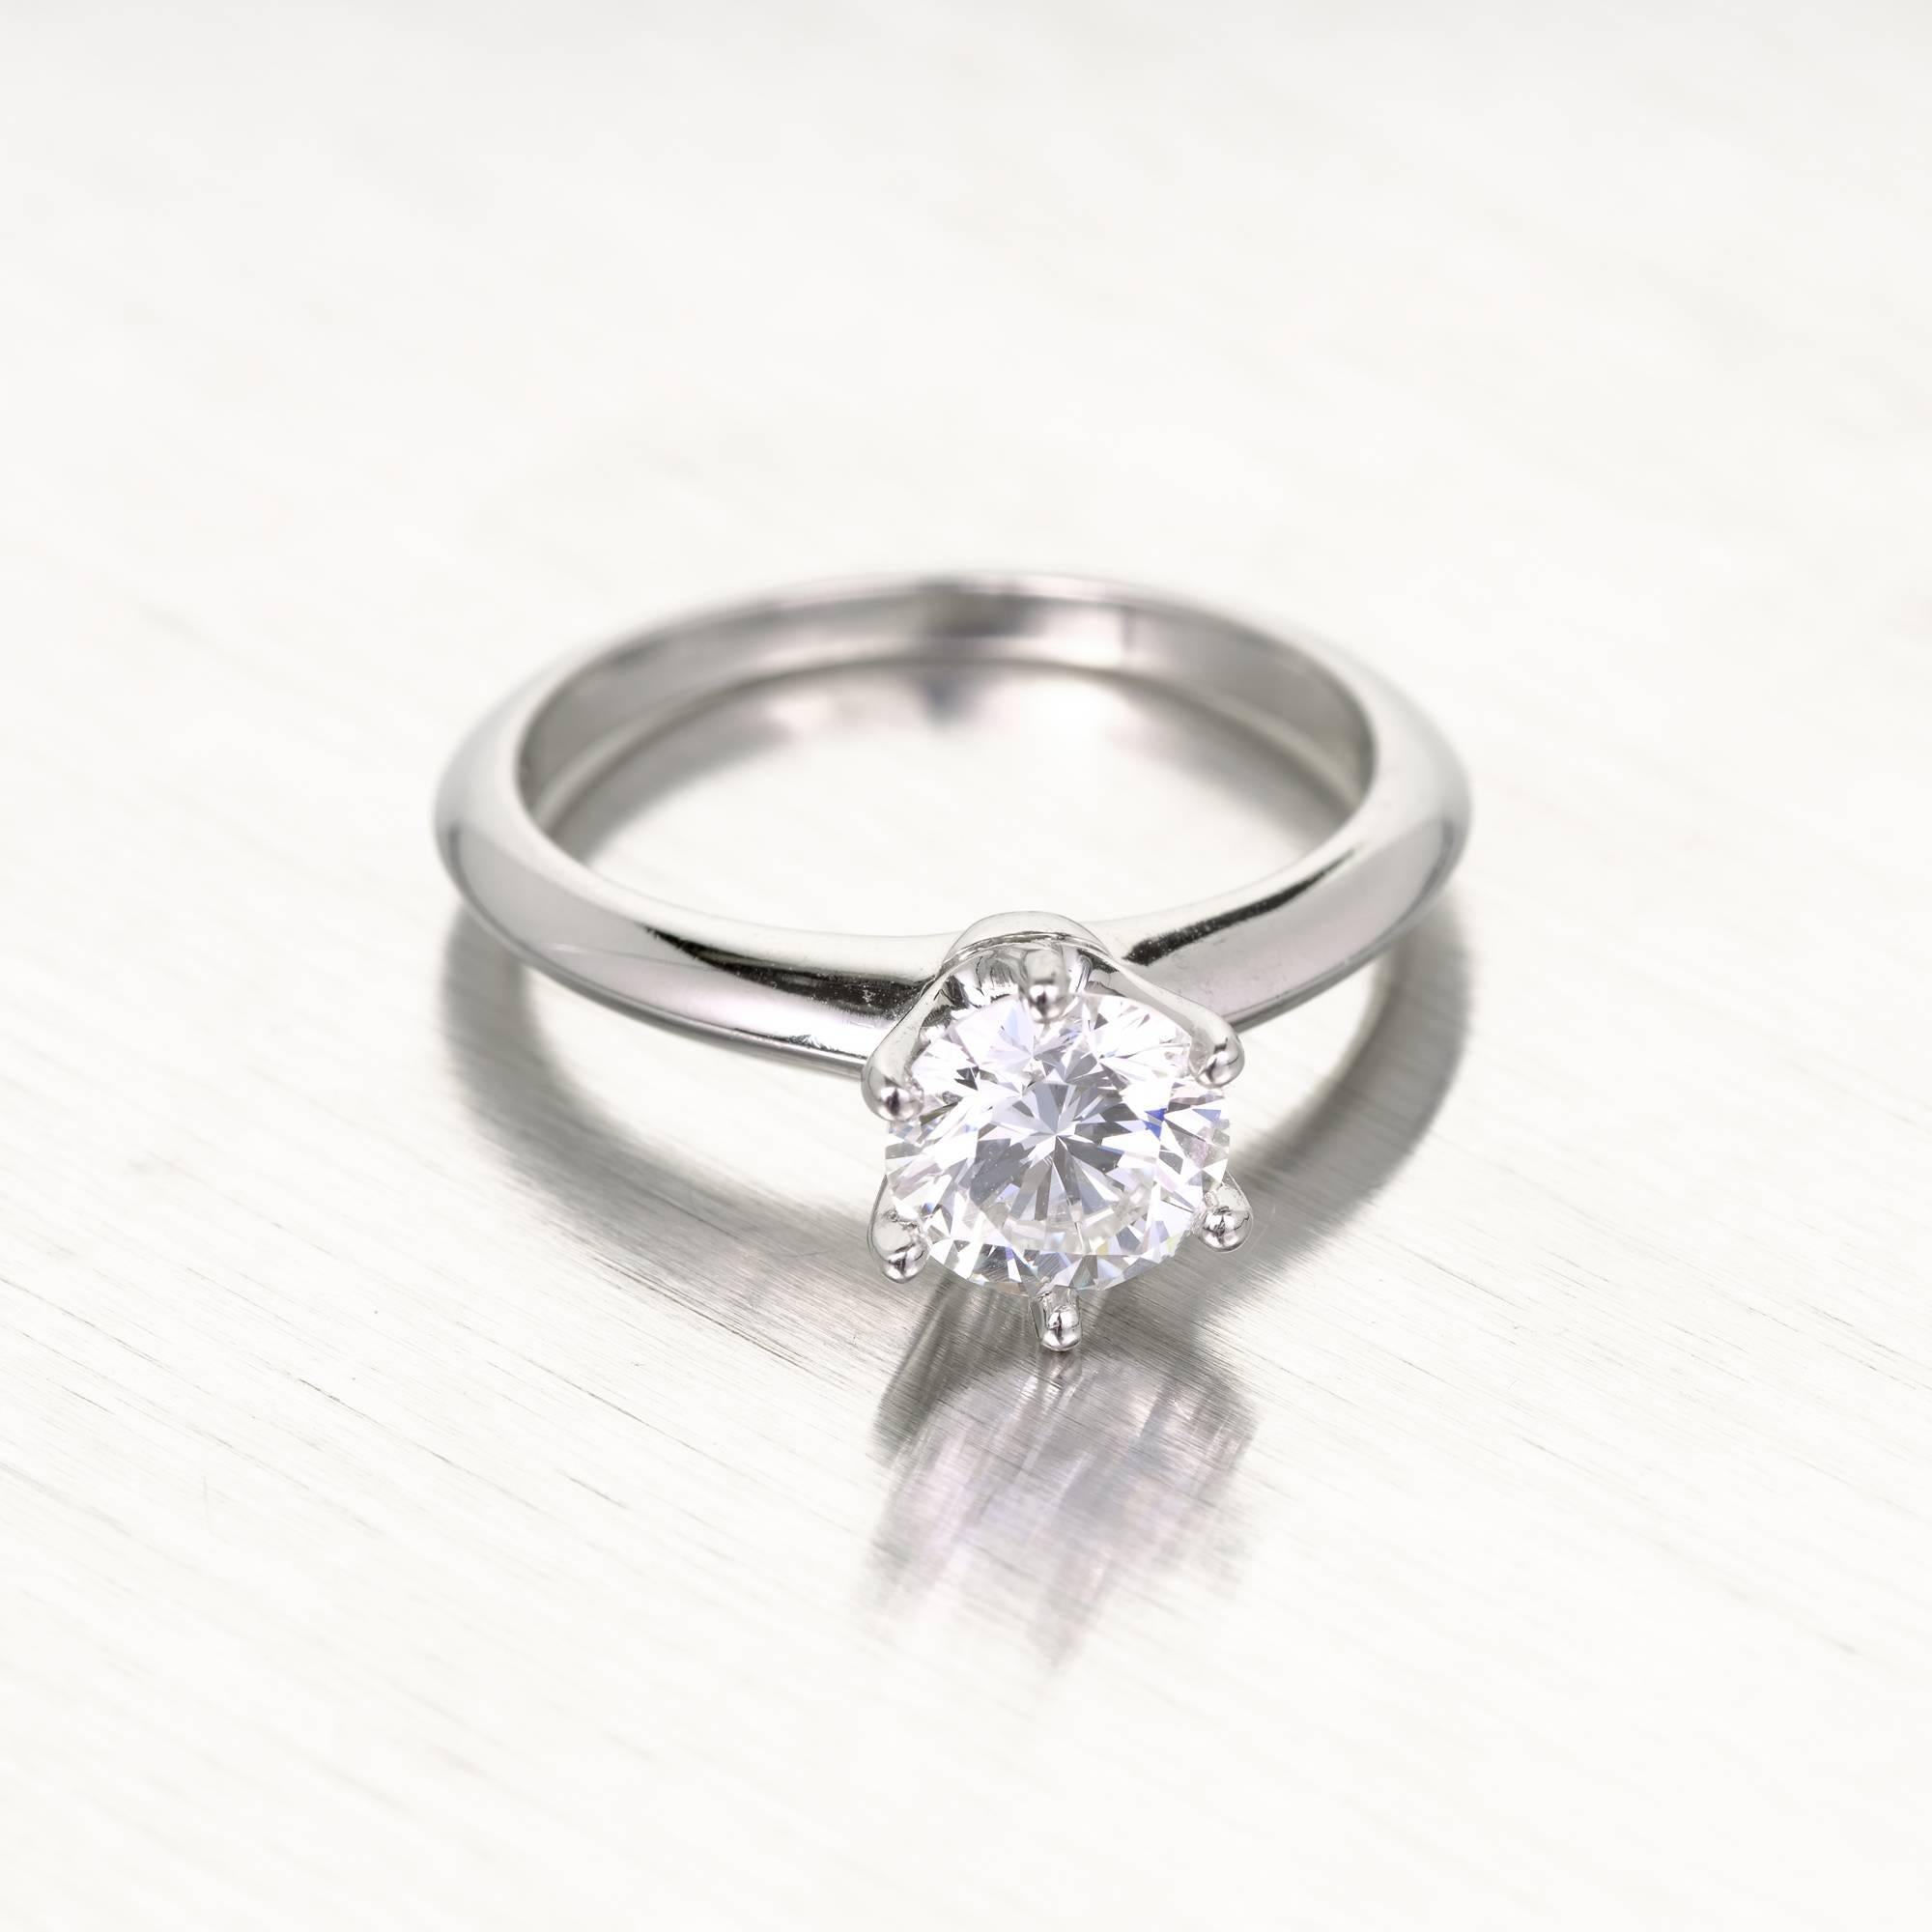 Tiffany & Co diamond solitaire engagement ring in a platinum setting. 1980-1990 stamped authentic Tiffany Platinum engagement ring.  GIA certified diamond. The diamond was removed for GIA certificate # testing and reset. 

1 round Ideal cut diamond,